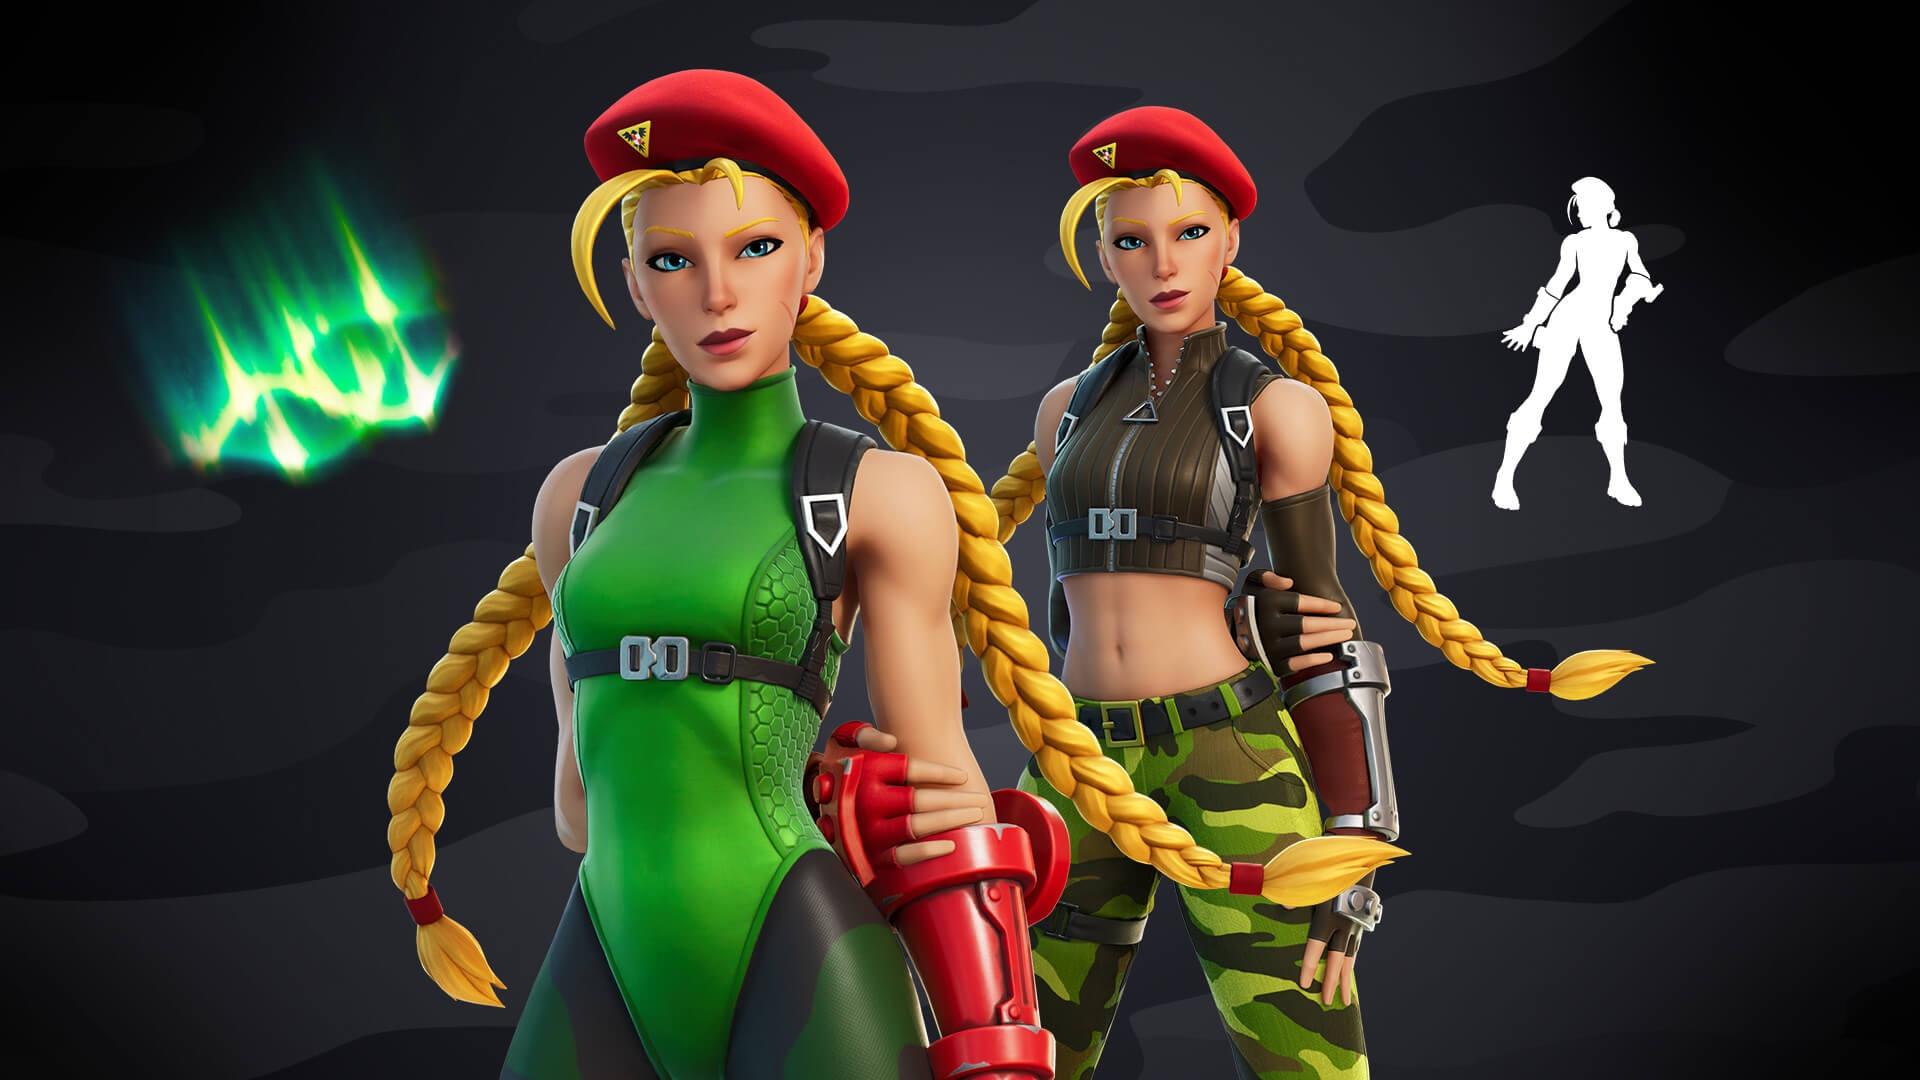  How to Get the Cammy Skin for Free in Fortnite Season 7 